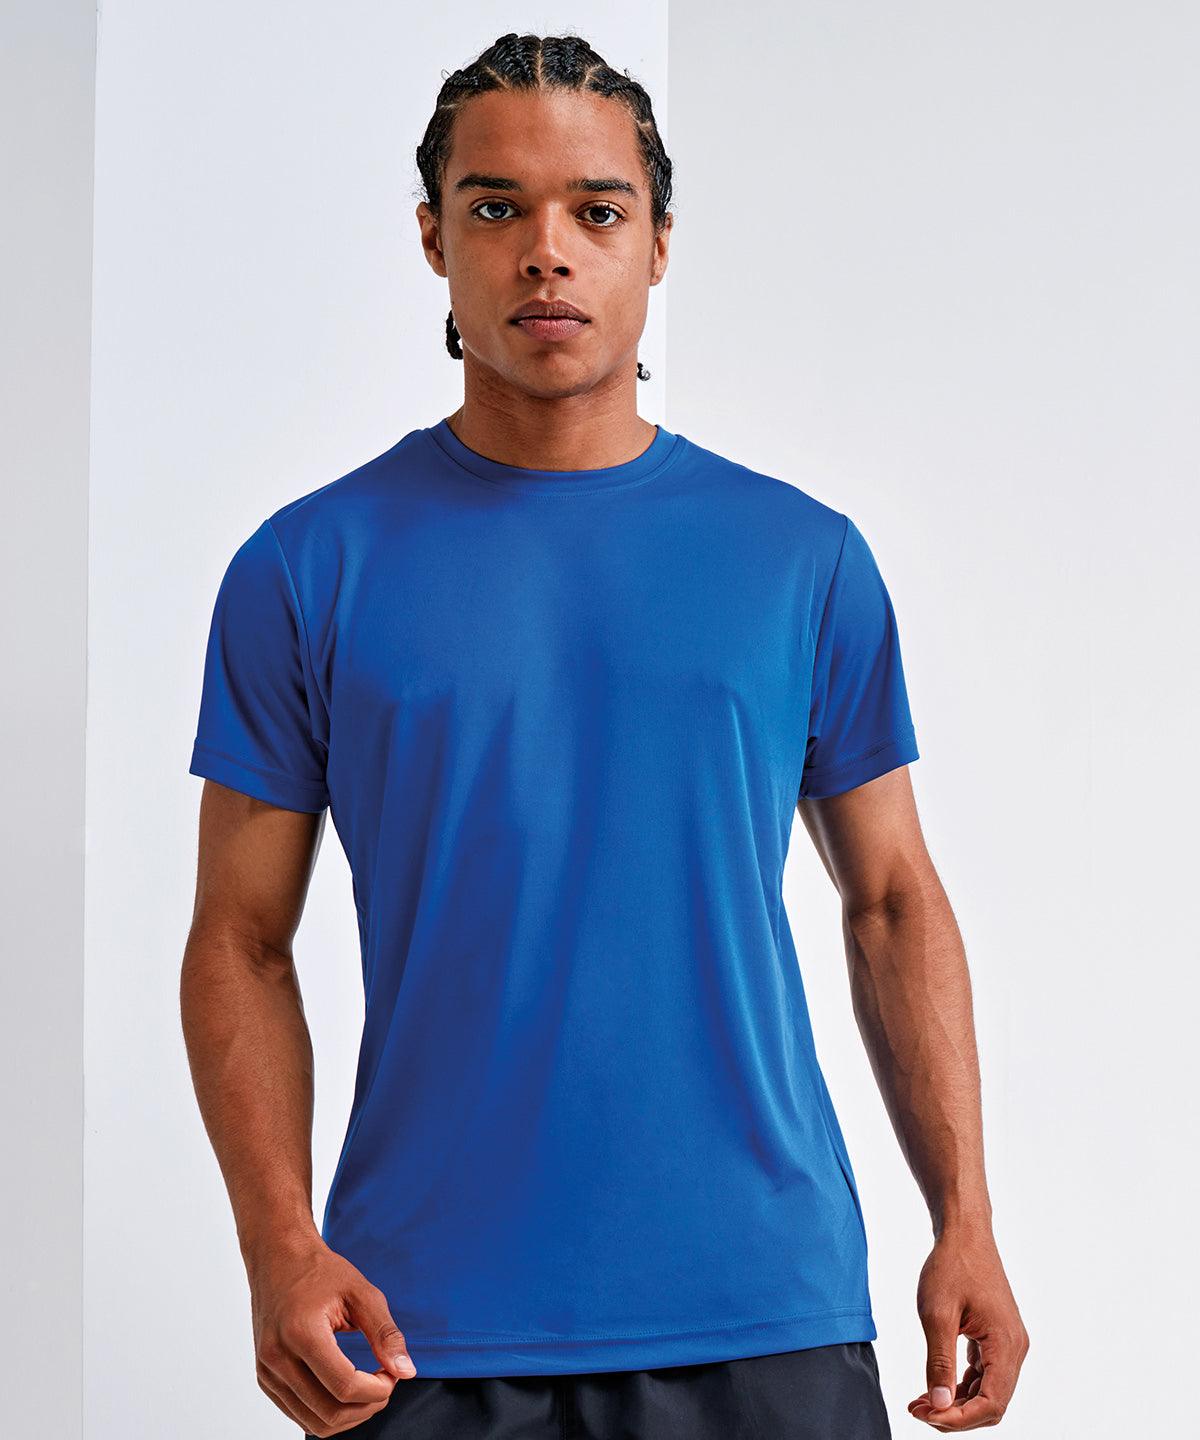 Bright Purple - TriDri® performance t-shirt T-Shirts TriDri® Activewear & Performance, Athleisurewear, Back to the Gym, Exclusives, Gymwear, Must Haves, New Colours For 2022, Outdoor Sports, Plus Sizes, Rebrandable, Sports & Leisure, T-Shirts & Vests, Team Sportswear, UPF Protection Schoolwear Centres